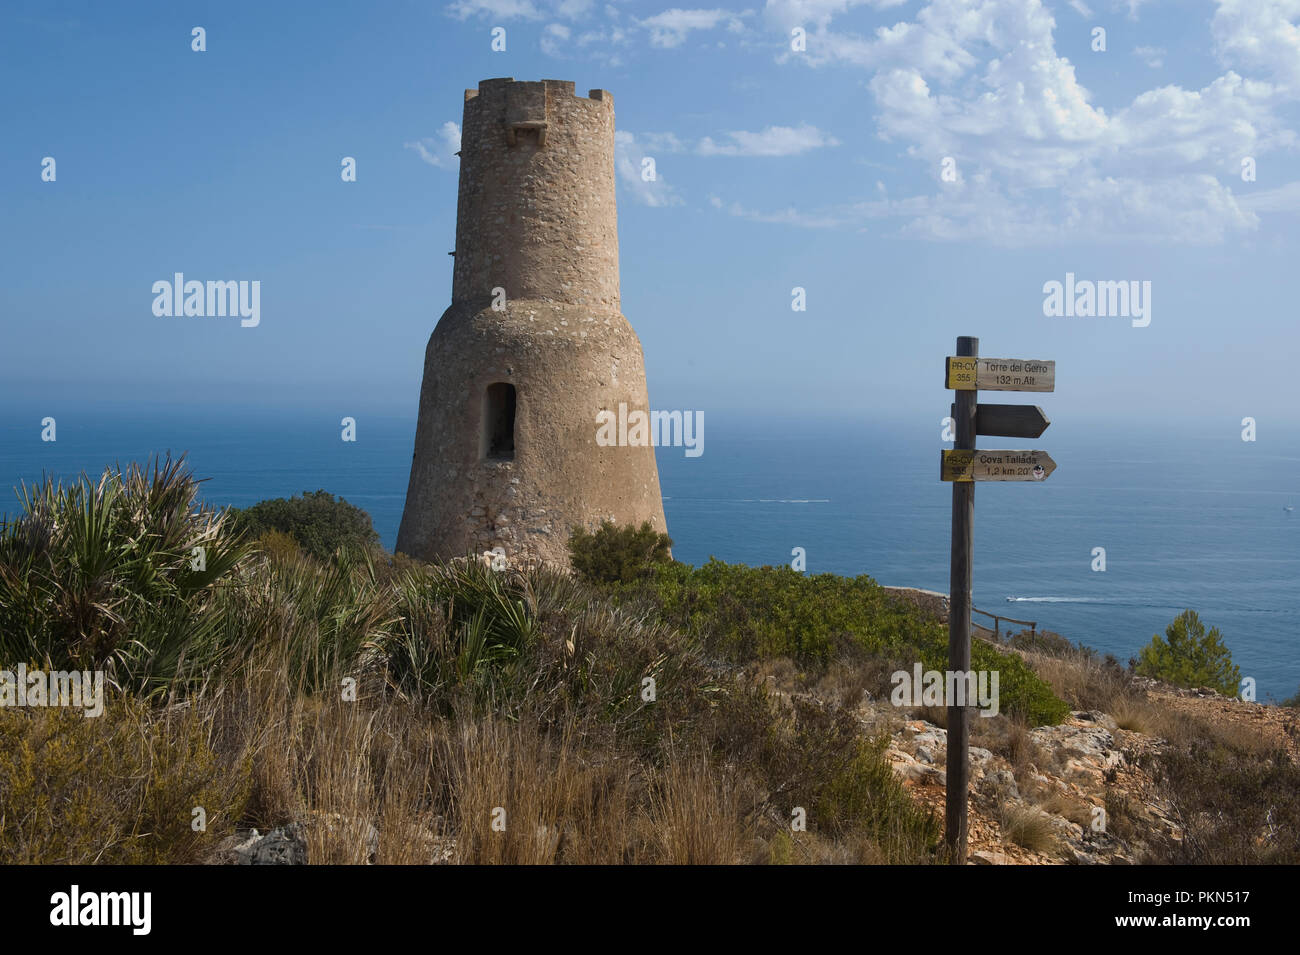 Torre del Gerre, old fortified observation tower on the Capo de San Antonio in Denia, Spain. Stock Photo